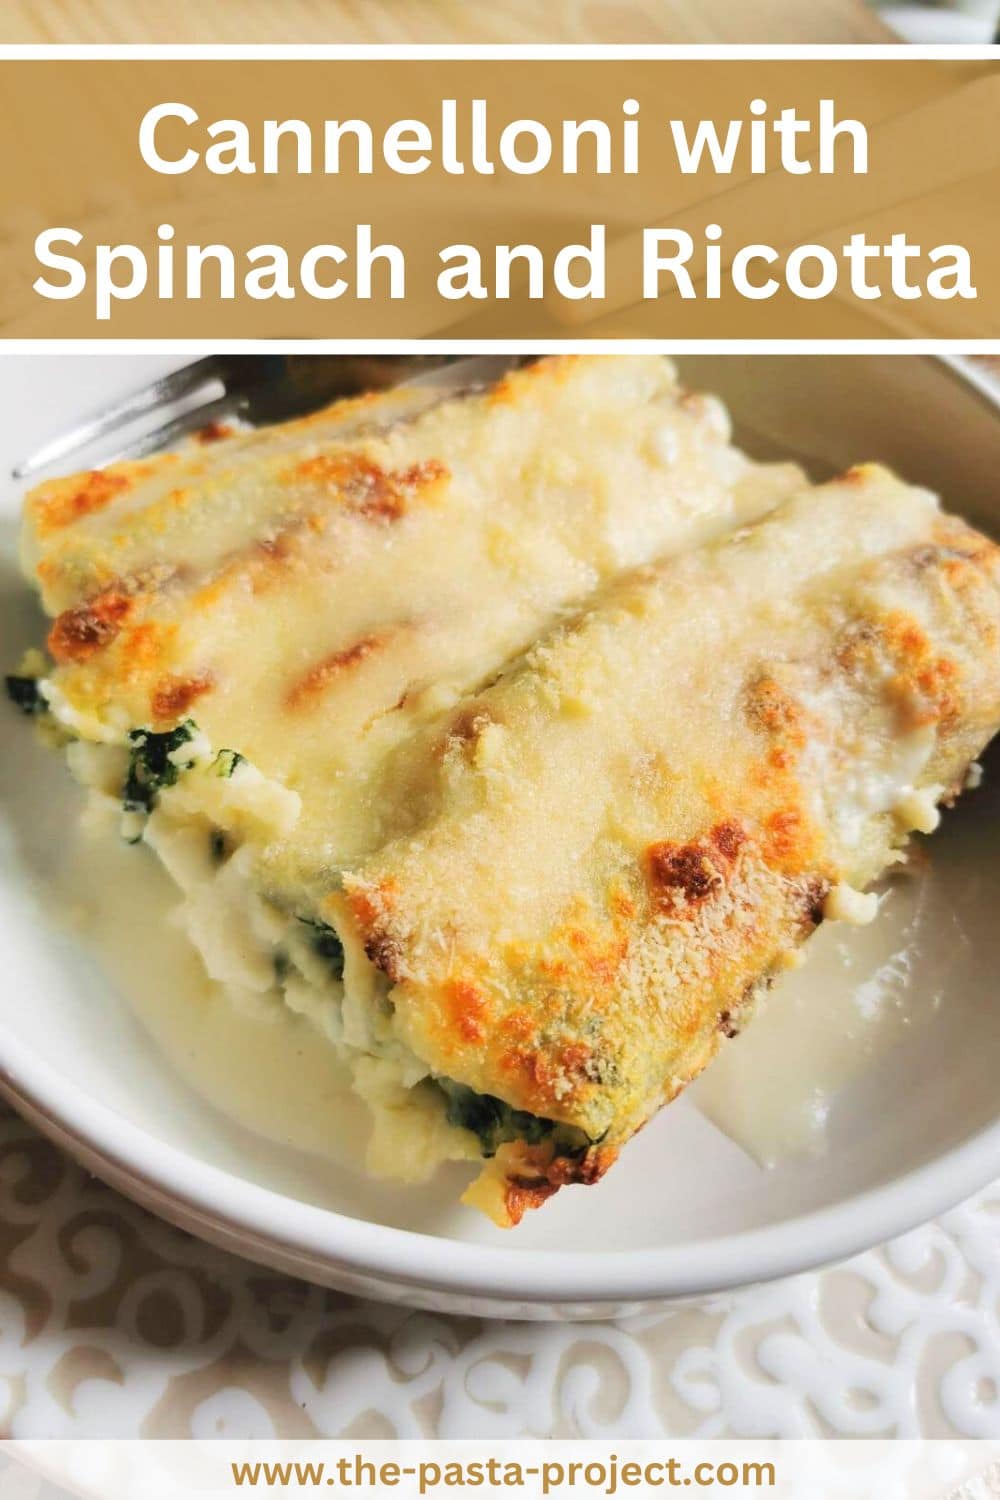 Cannelloni with Spinach and Ricotta.